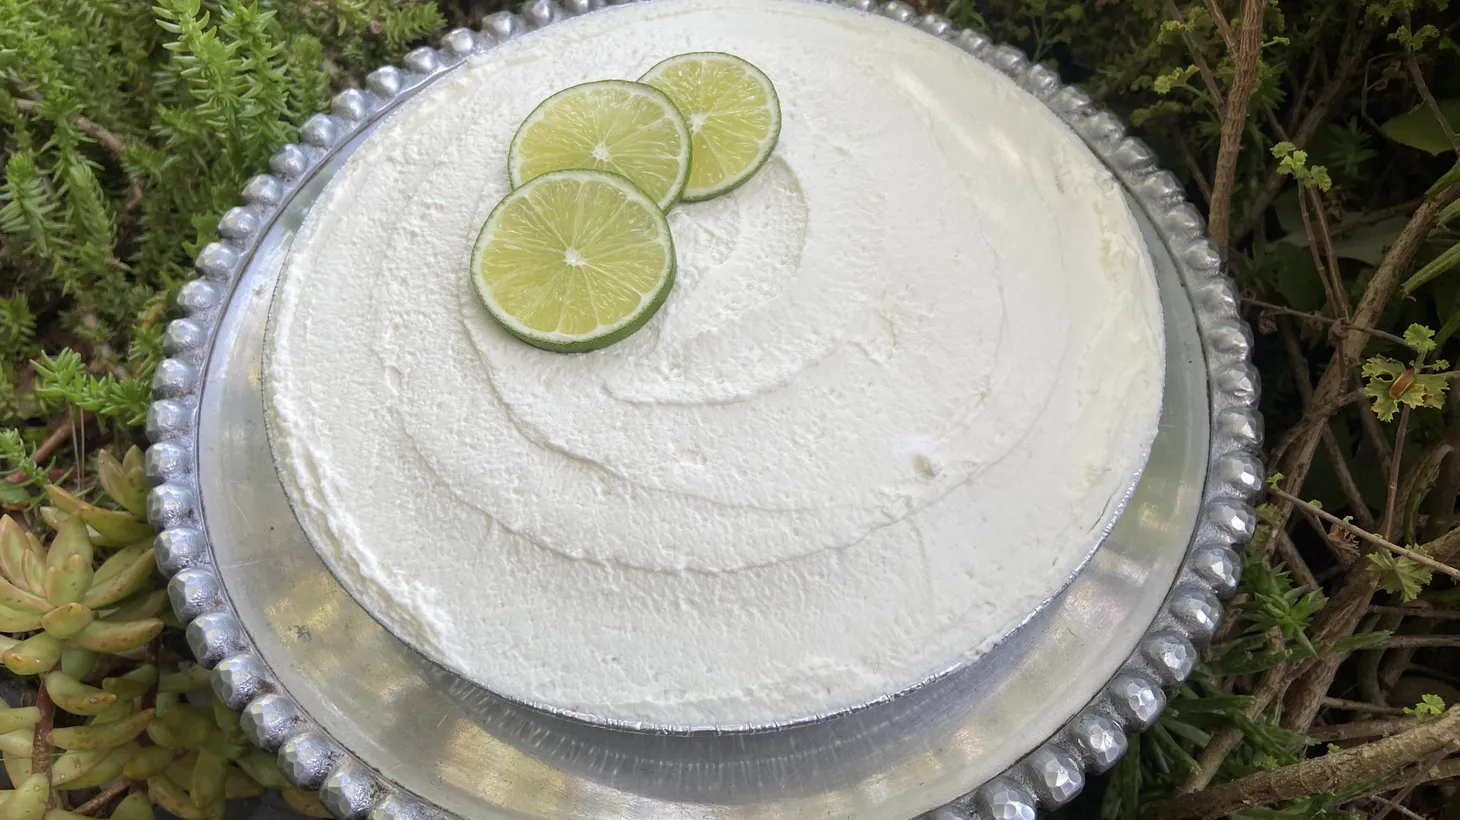 Tracy Ann’s key lime pie is a creamy take on the classic.